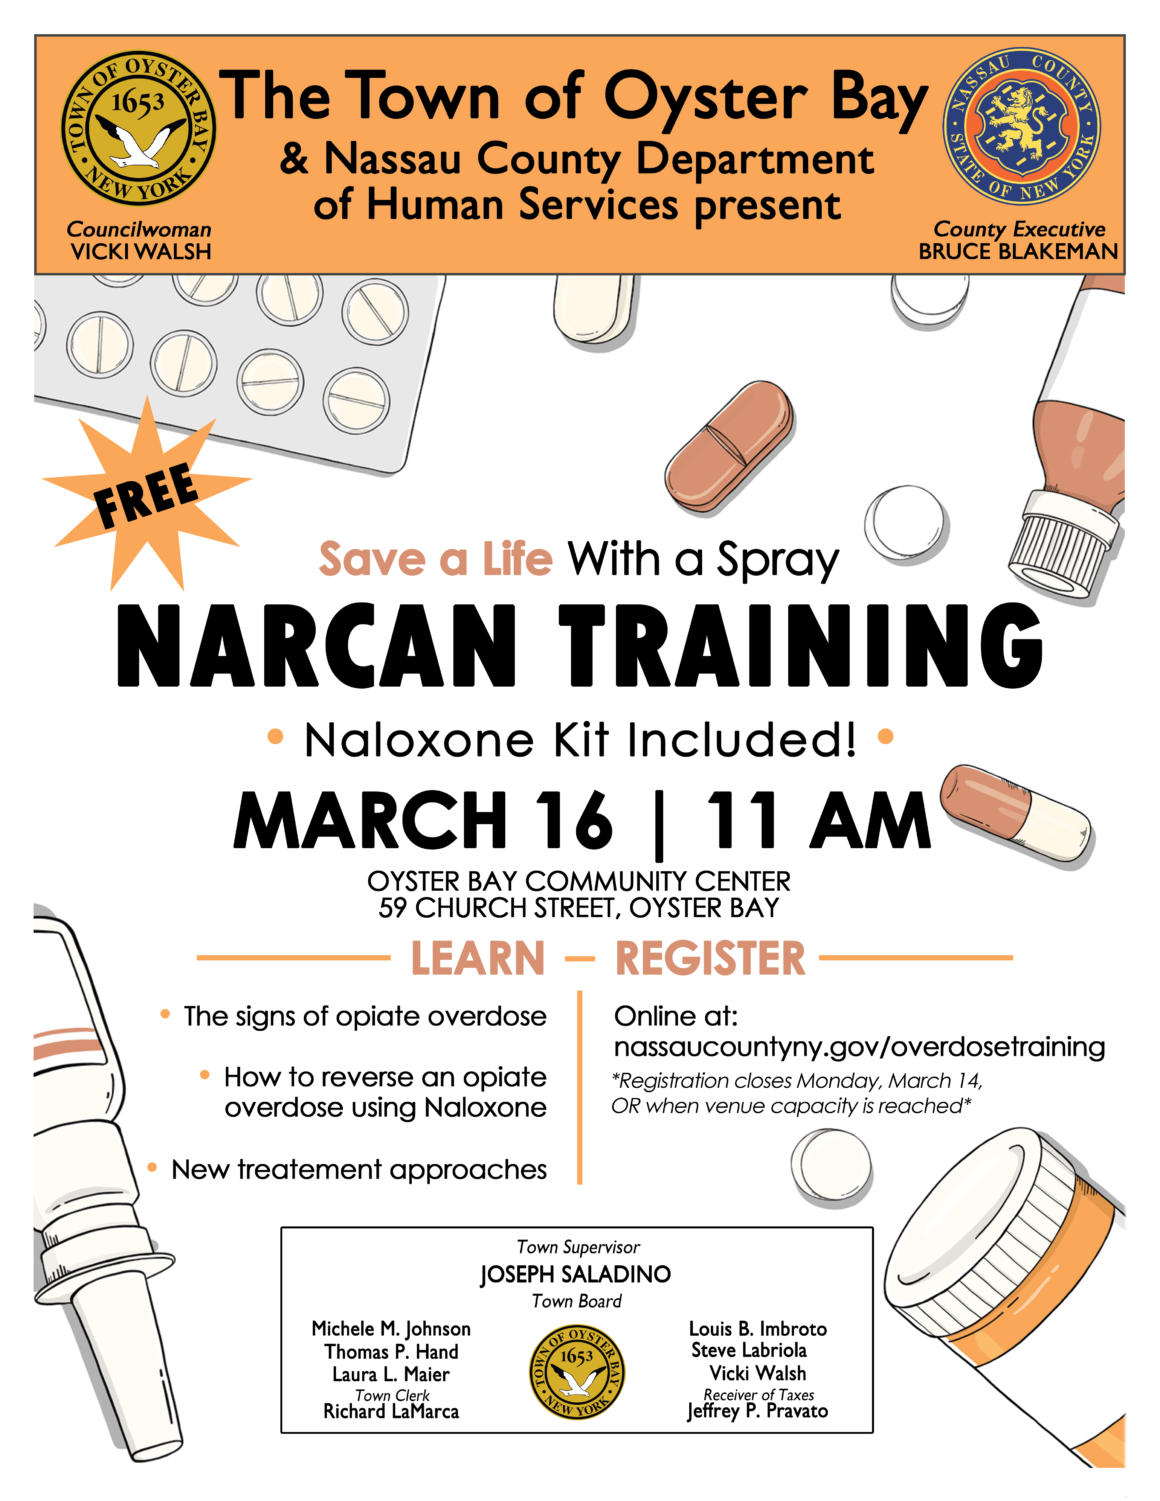 Walsh & Blakeman Partner to Offer Free Narcan Training Session to Residents